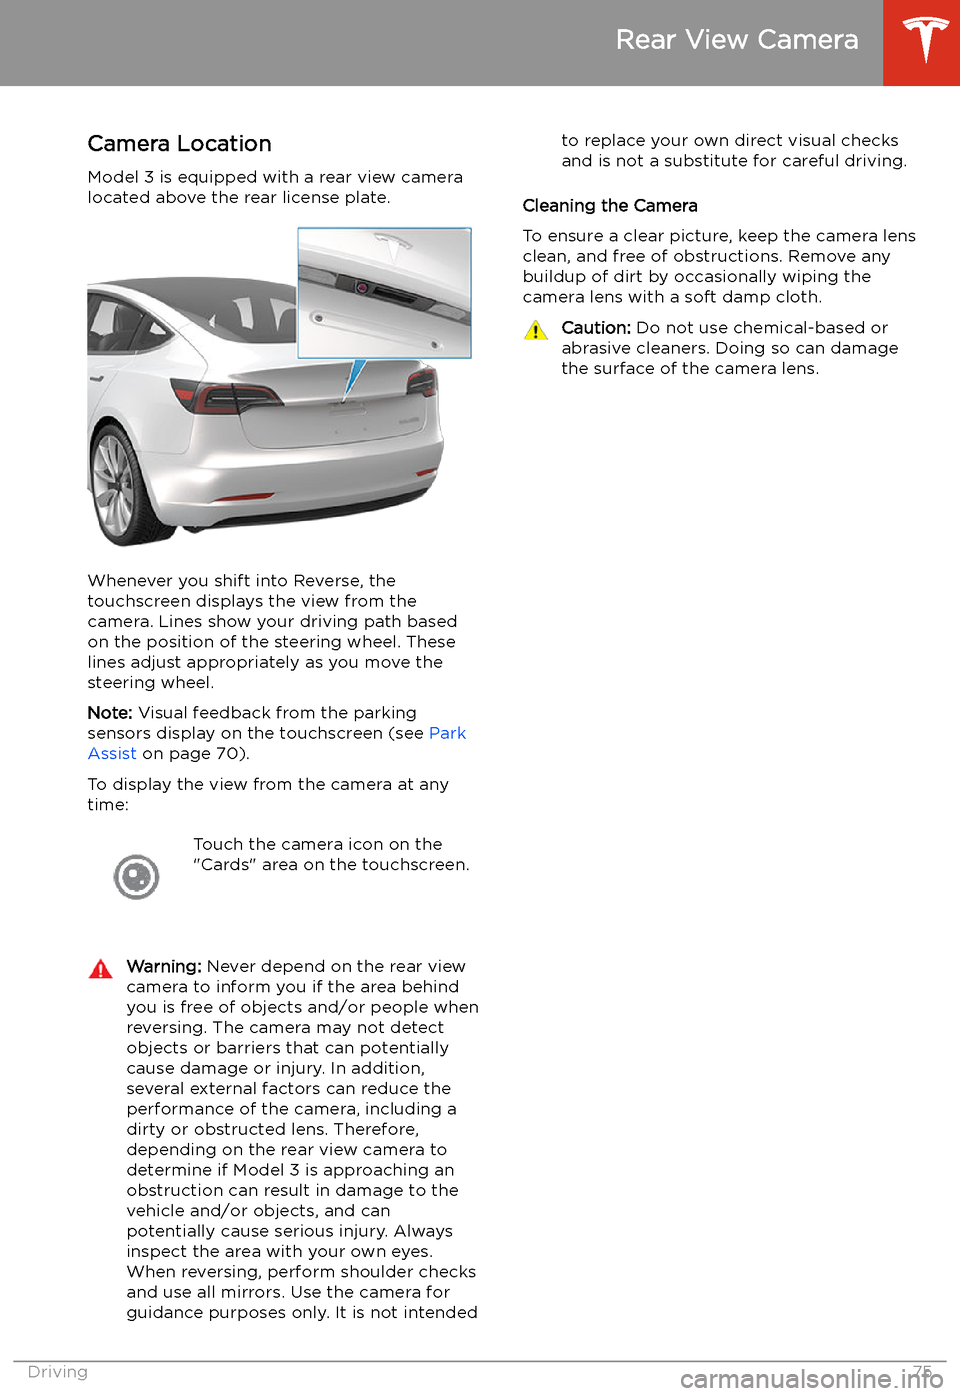 TESLA MODEL 3 2020  s Owners Guide Rear View Camera
Camera Location
Model 3 is equipped with a rear view camera
located above the rear license plate.
Whenever you shift into Reverse, the
touchscreen displays the view from the
camera. L